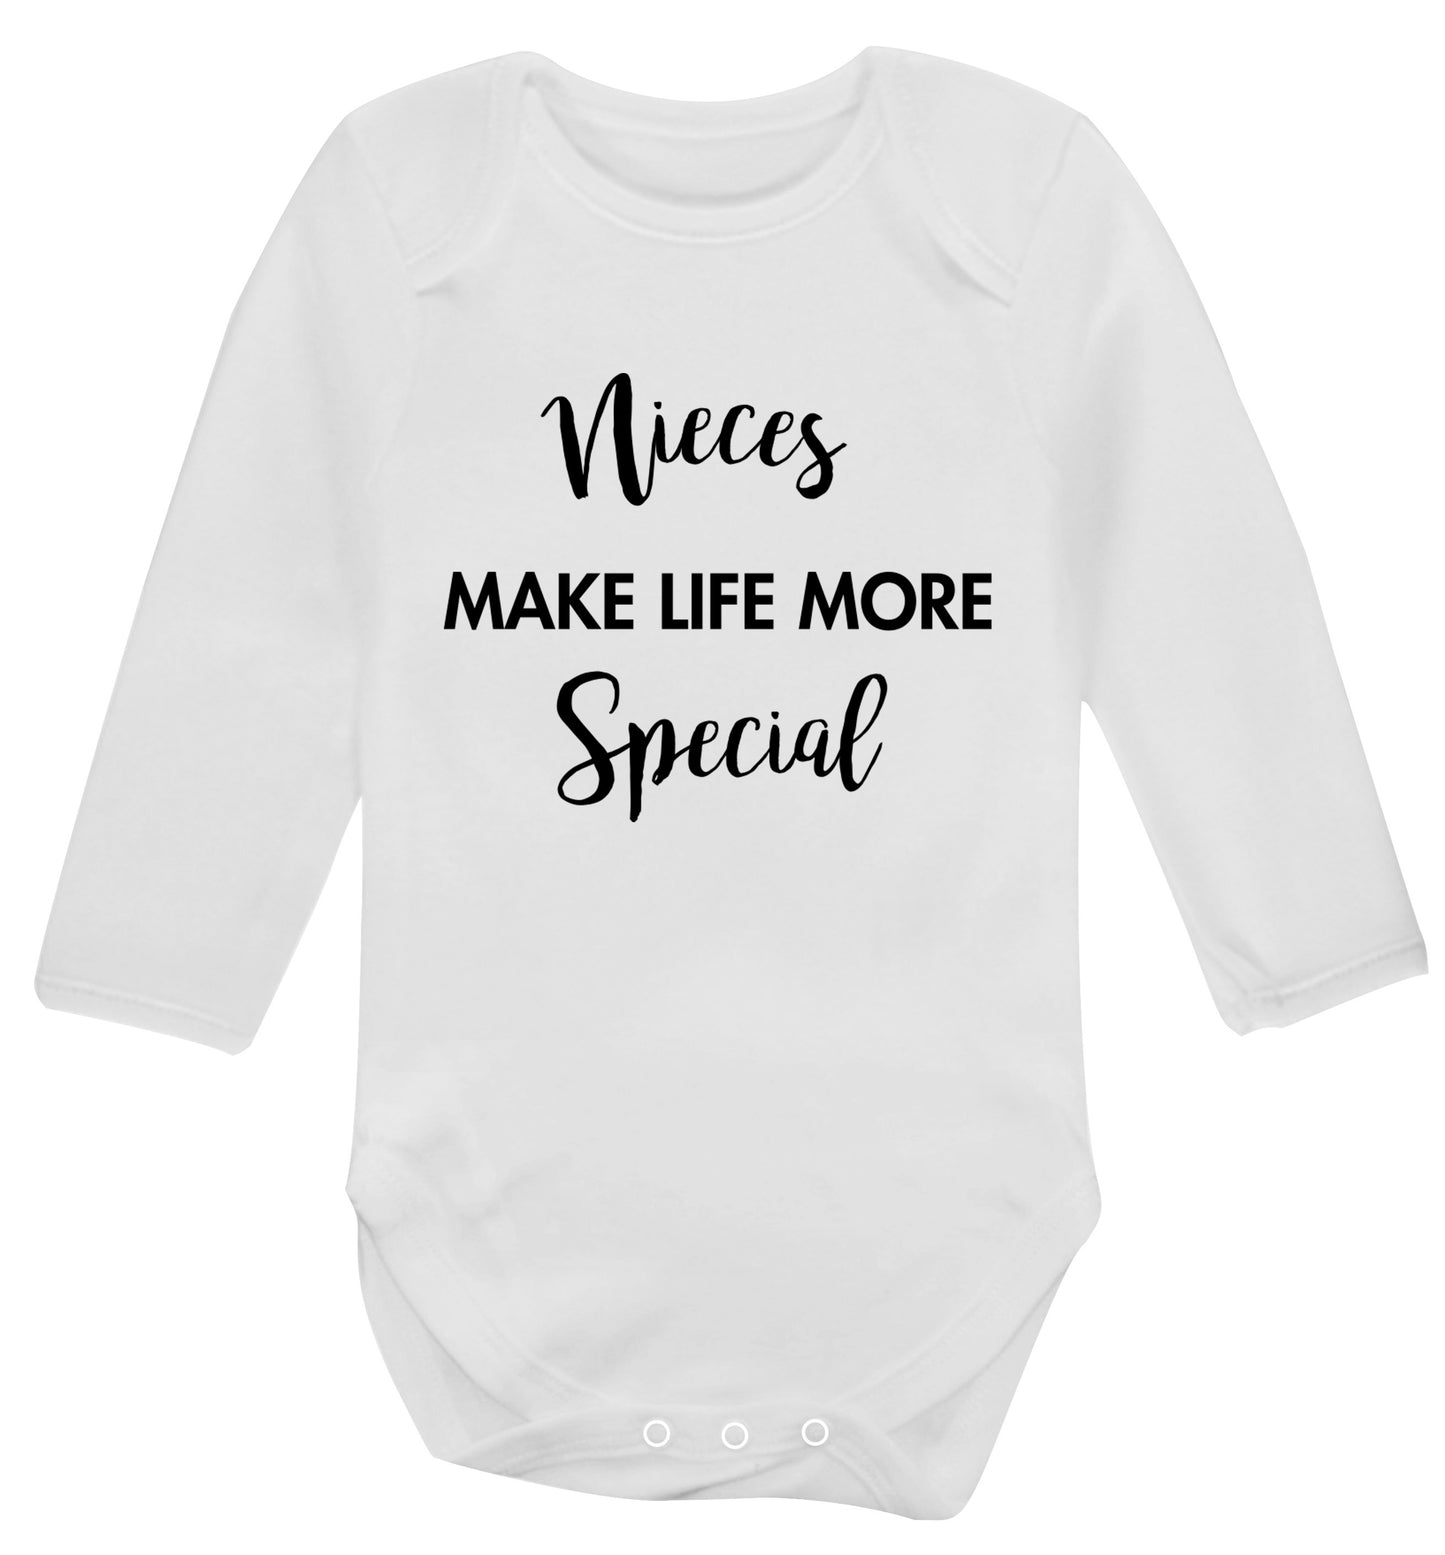 Nieces make life more special Baby Vest long sleeved white 6-12 months